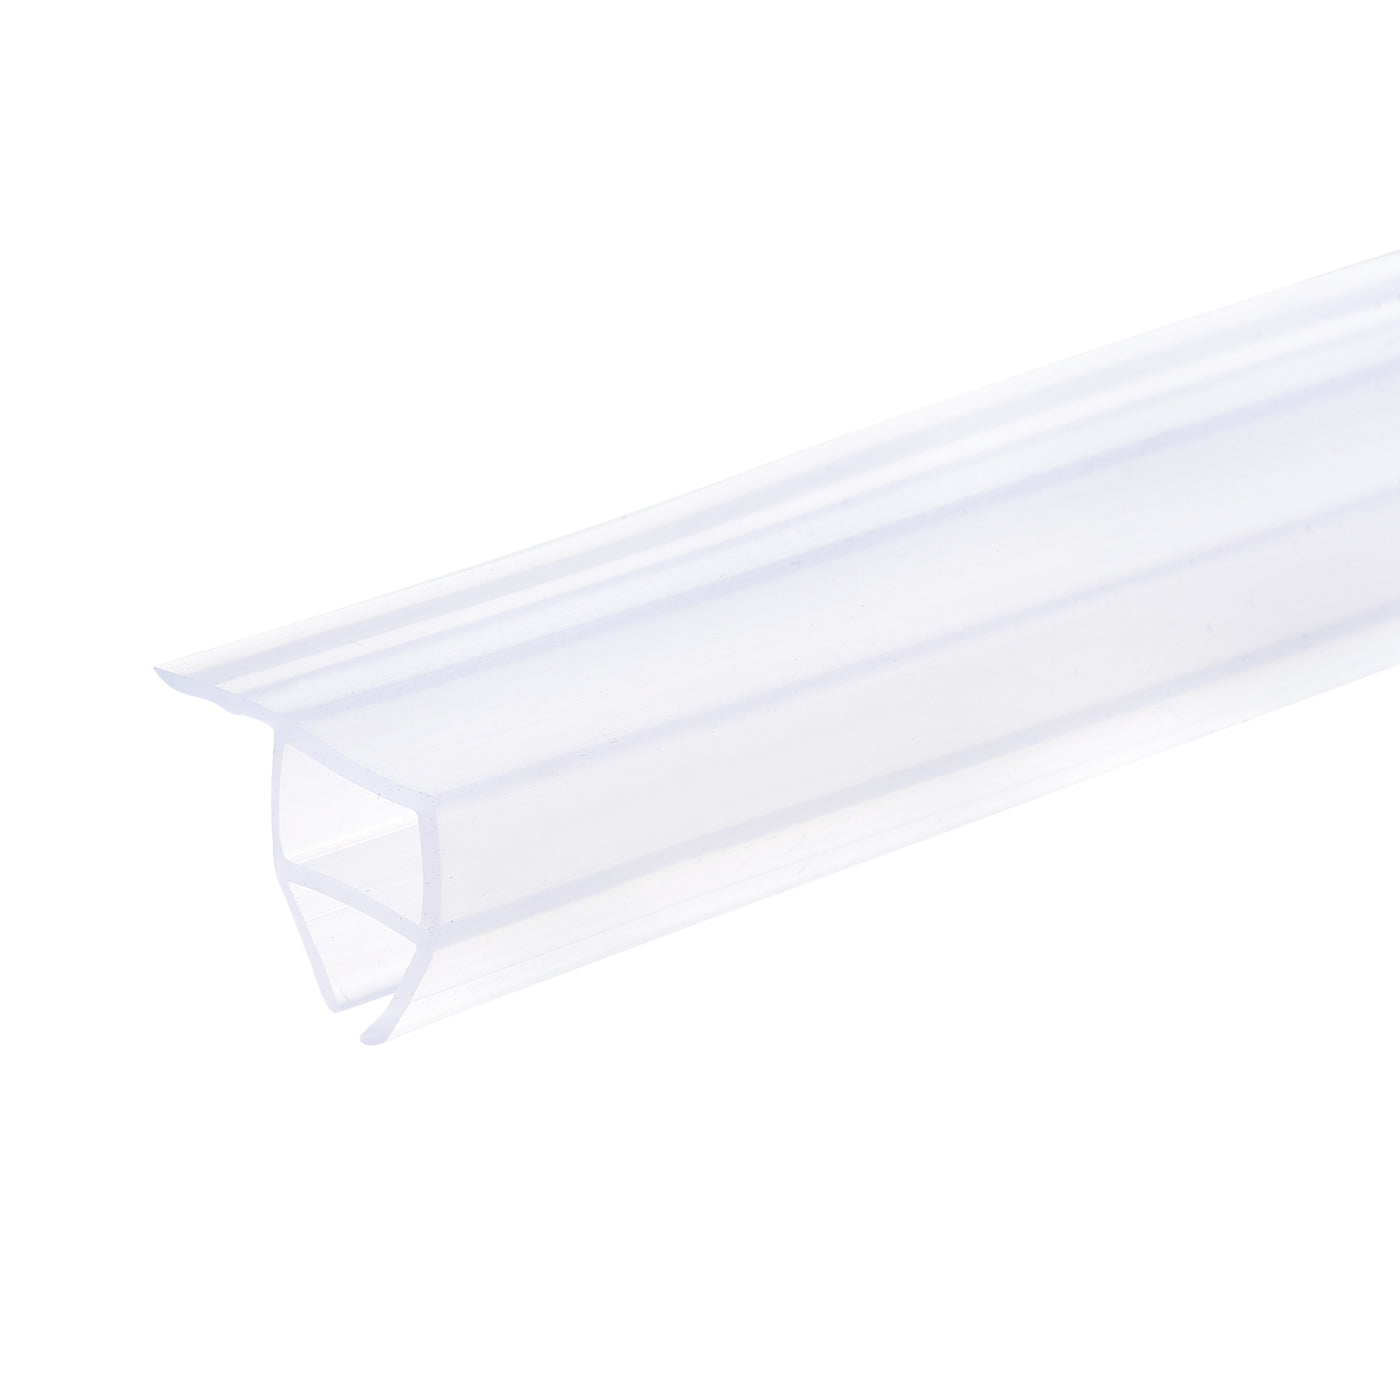 Uxcell Uxcell Frameless Glass Door Sweep 137.8" for 3/8"(10mm) Glass Corner-Type Seal Strip